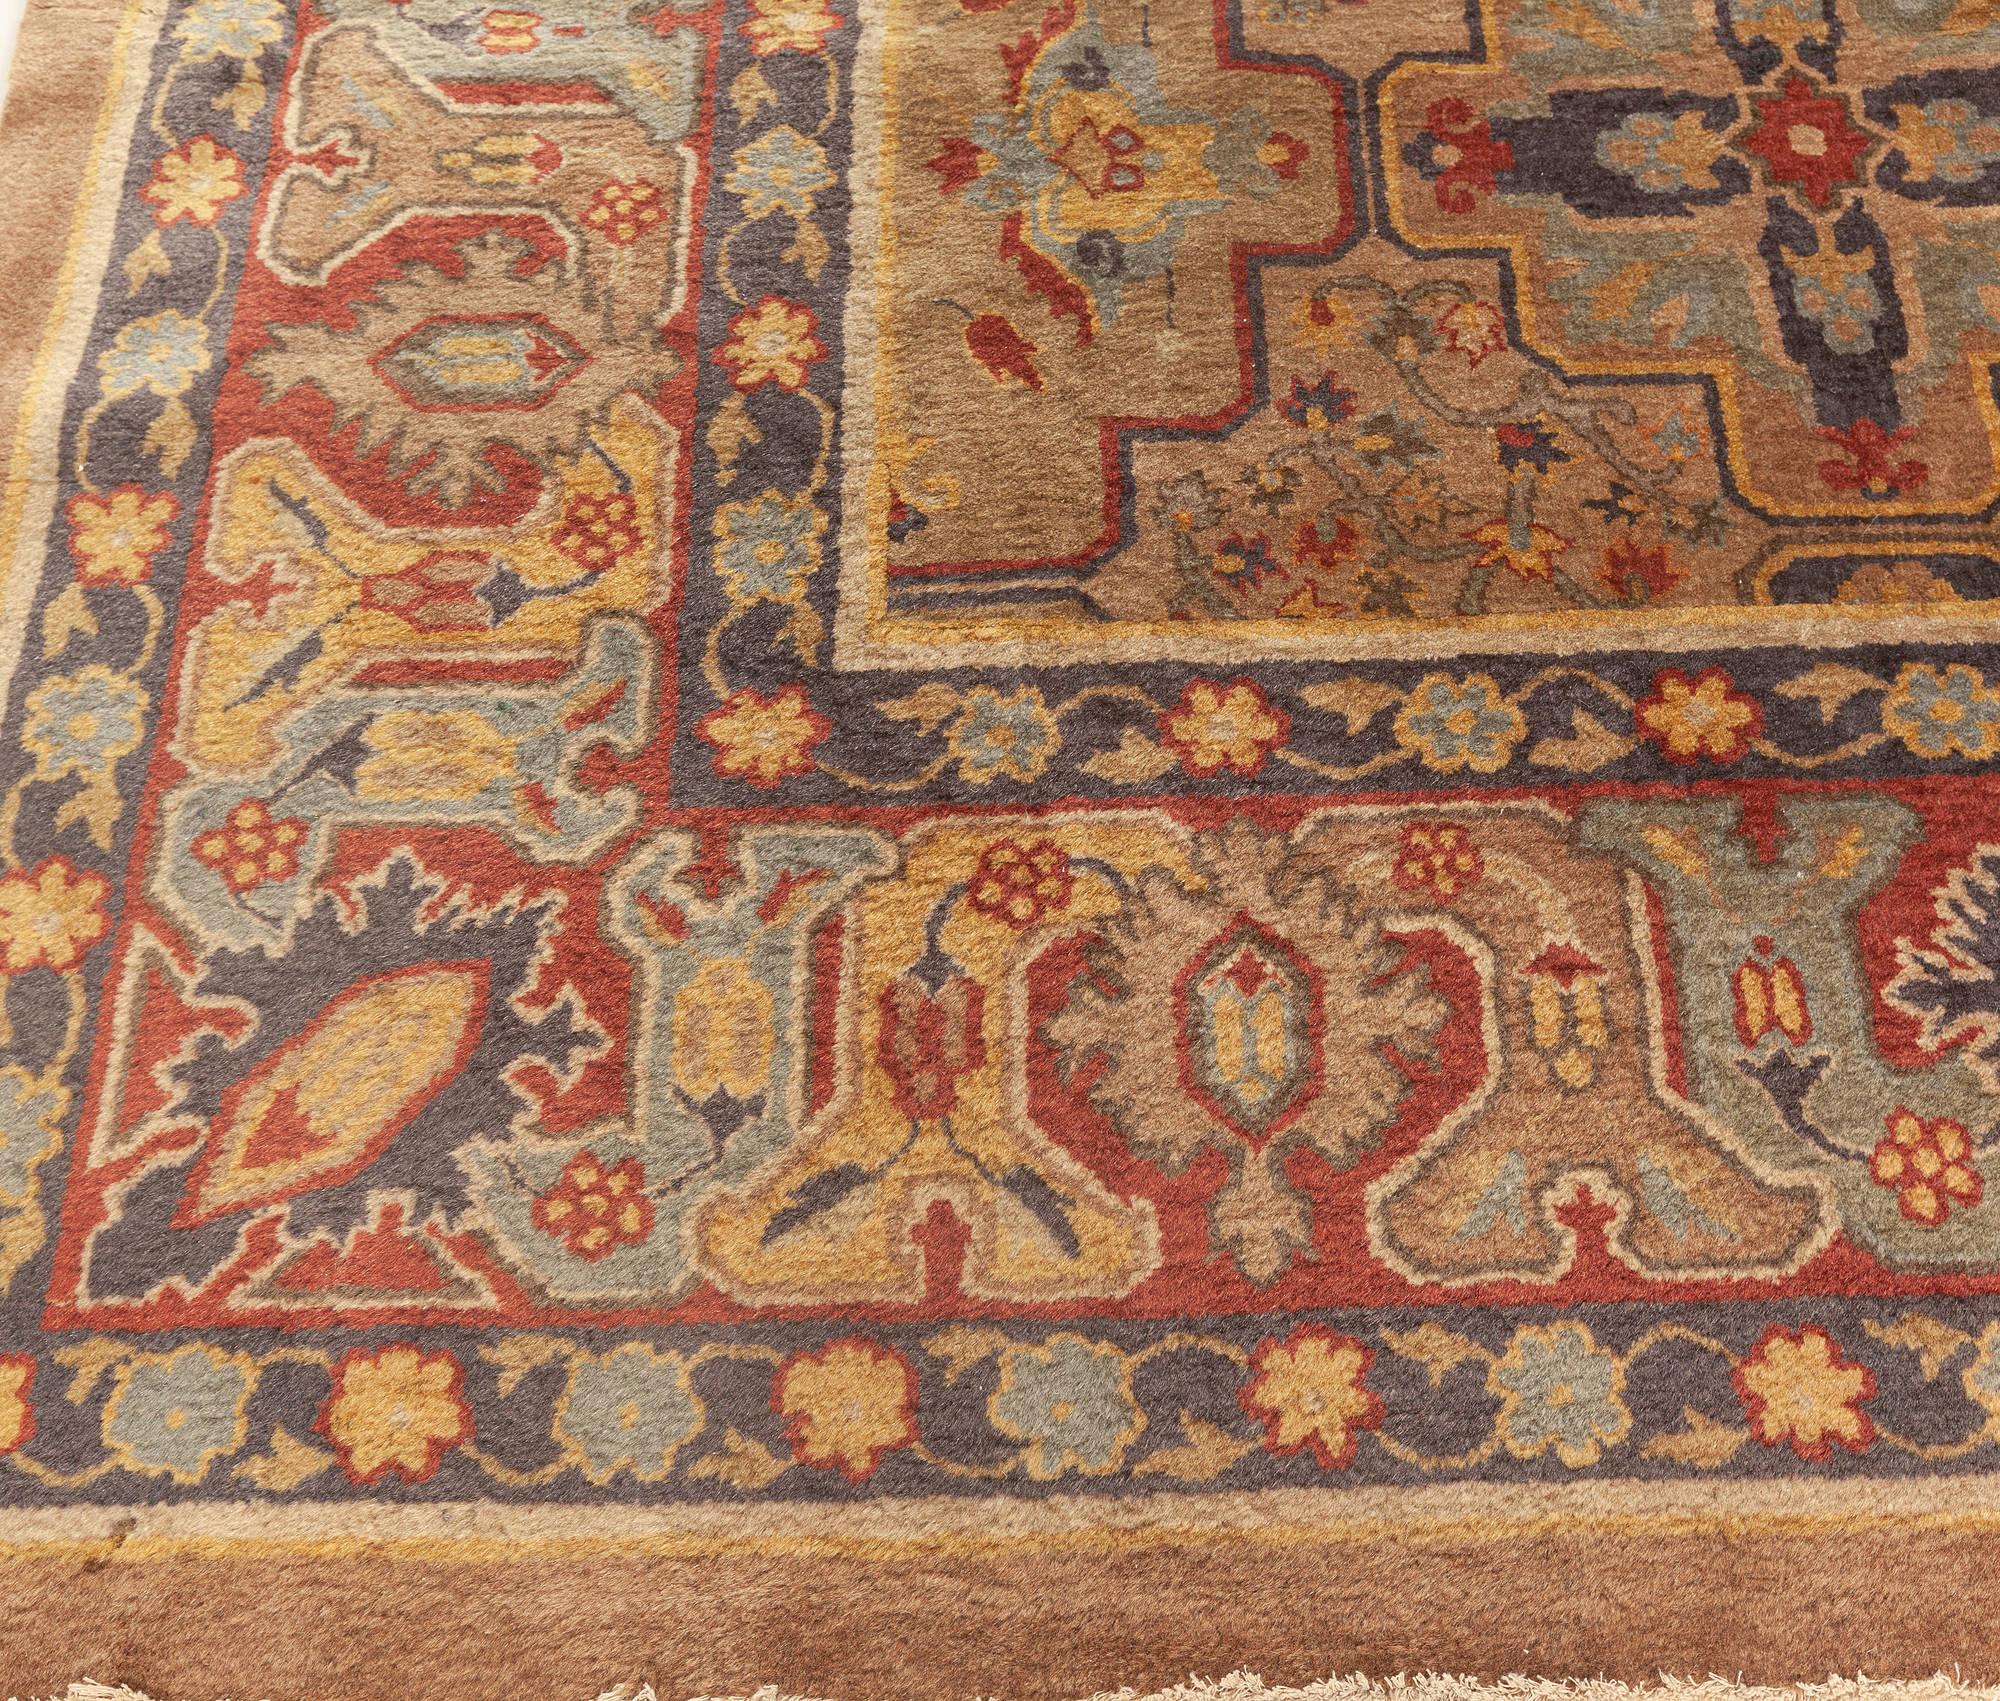 Early 20th Century Indian Handmade Wool Carpet For Sale 2